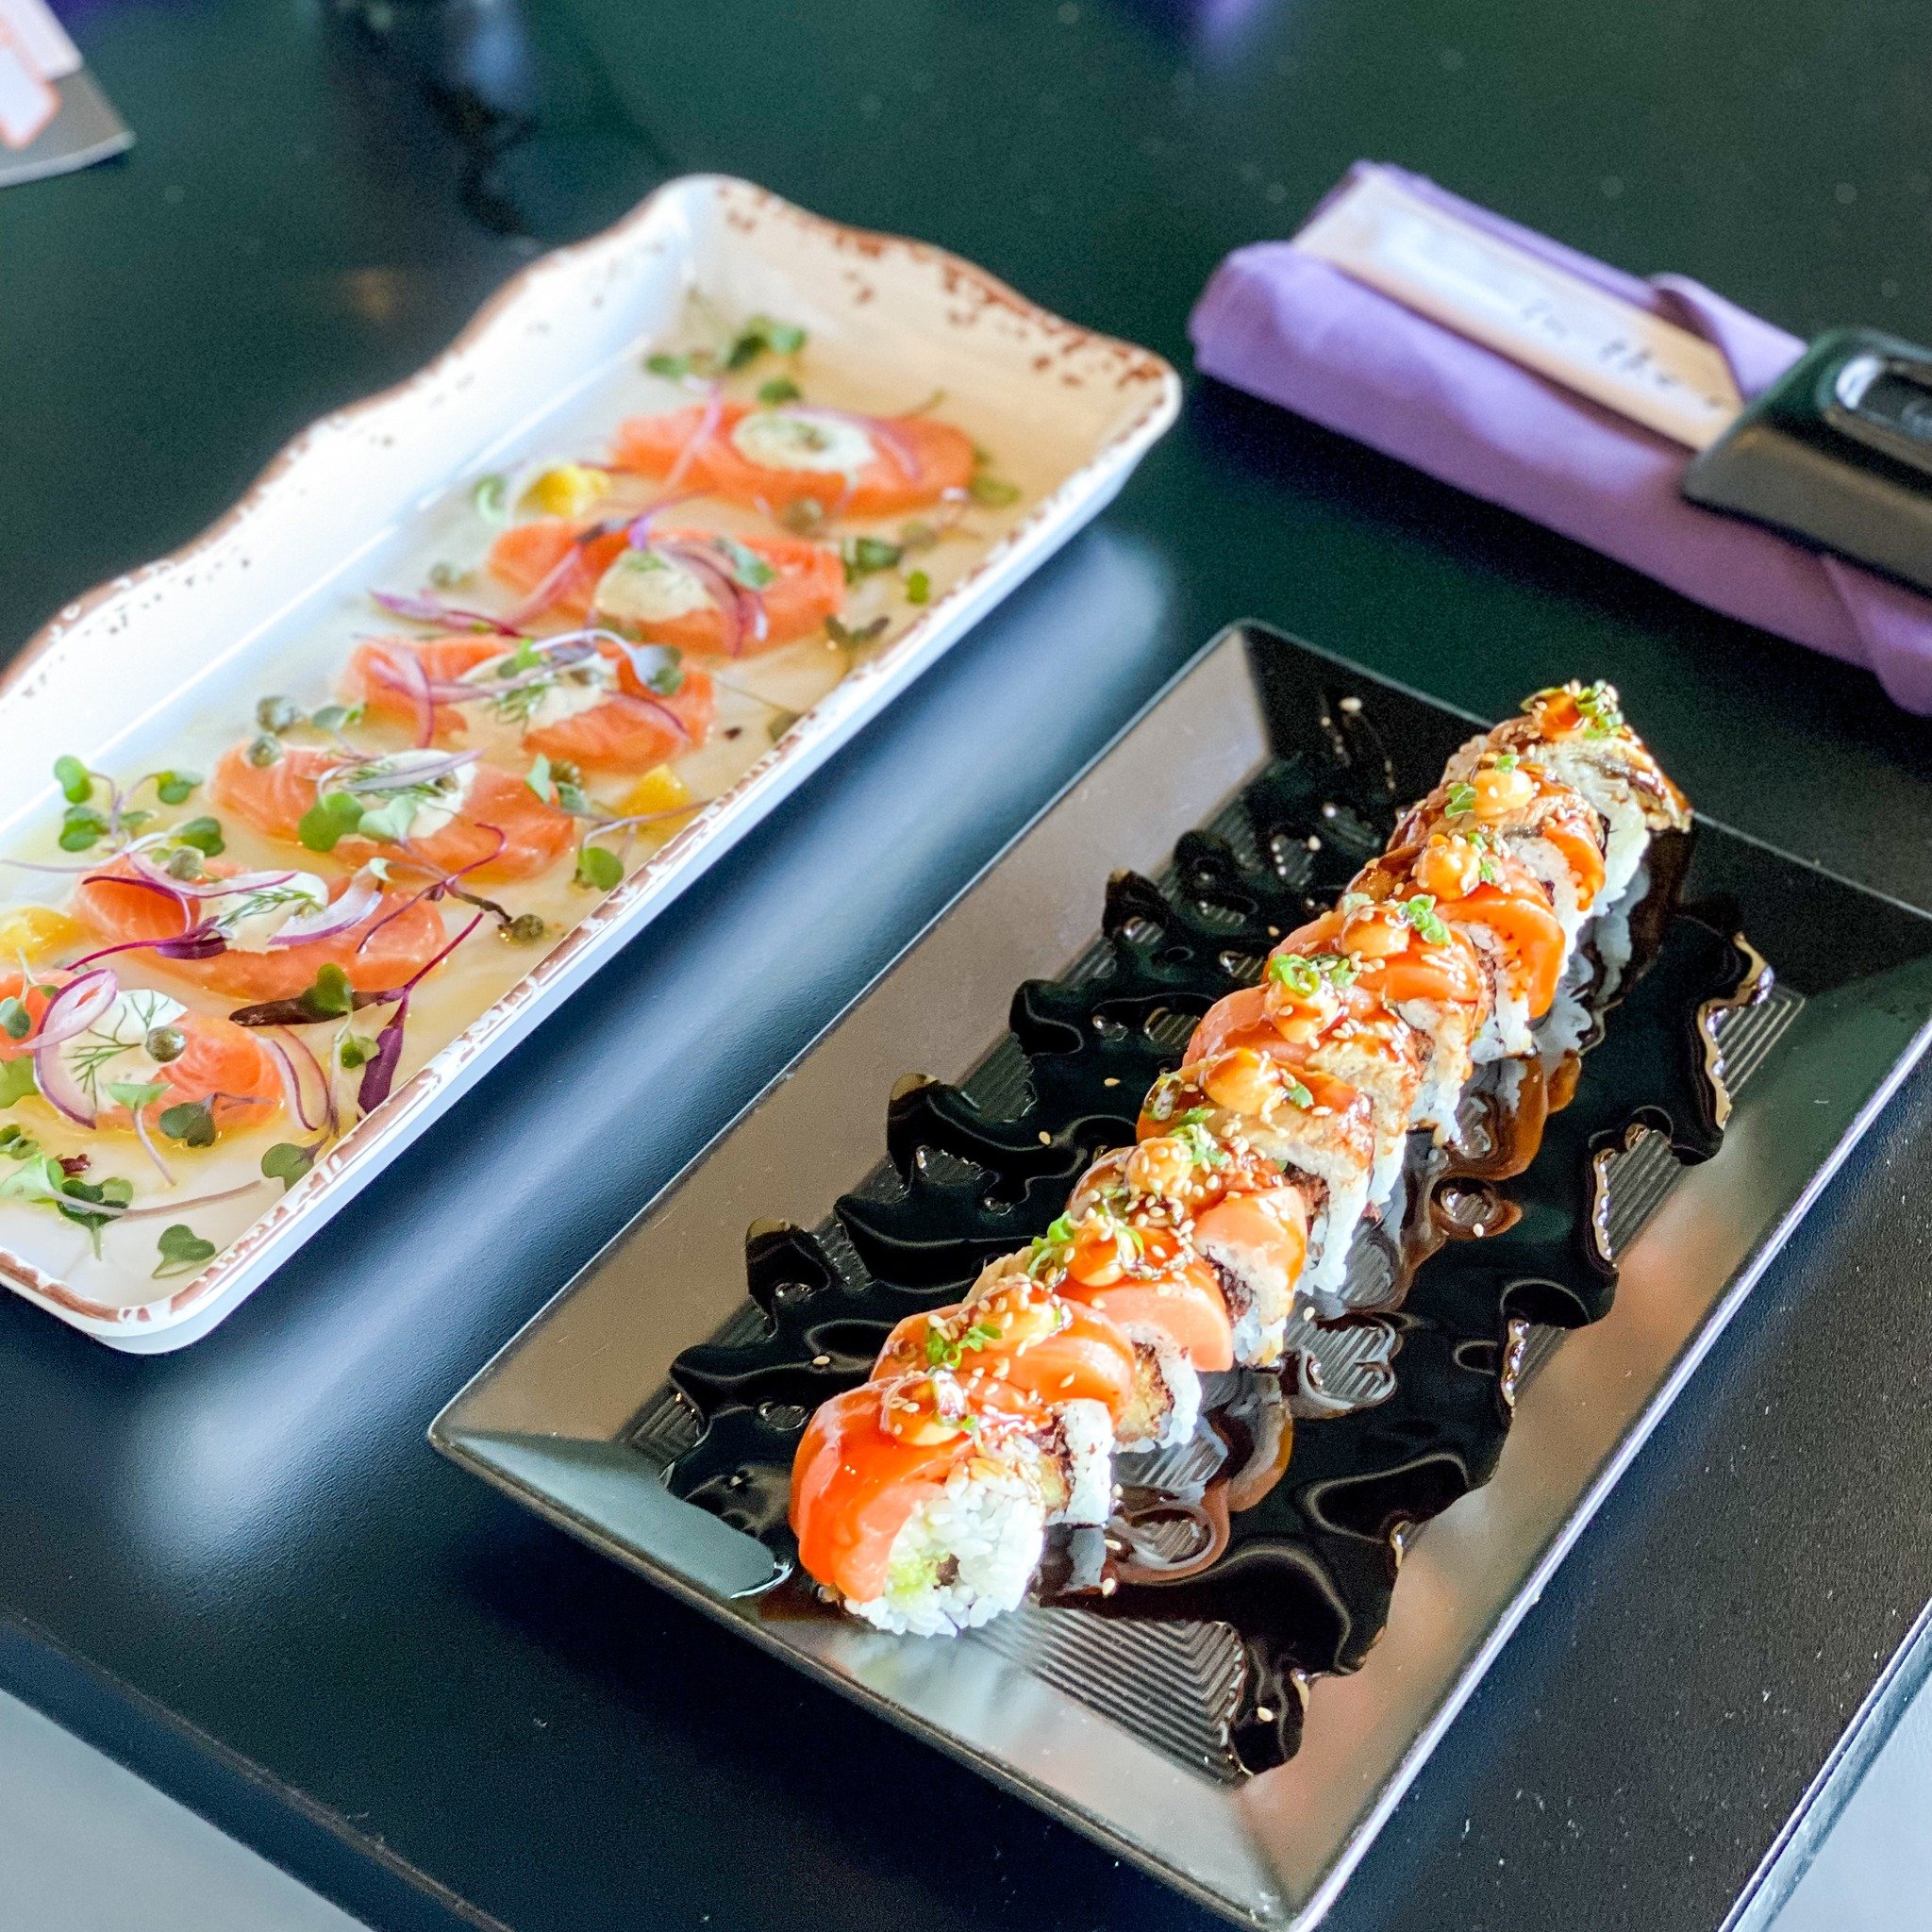 Hill&rsquo;s itr special drop is here! 🤌

📸 here: 

💜Fire n Smoke Roll 
💜King salmon sashimi 

For more details, visit 👉🏼 intheraw.com/on-the-hill

#tulsafoodie #tulsaeats #southtulsa